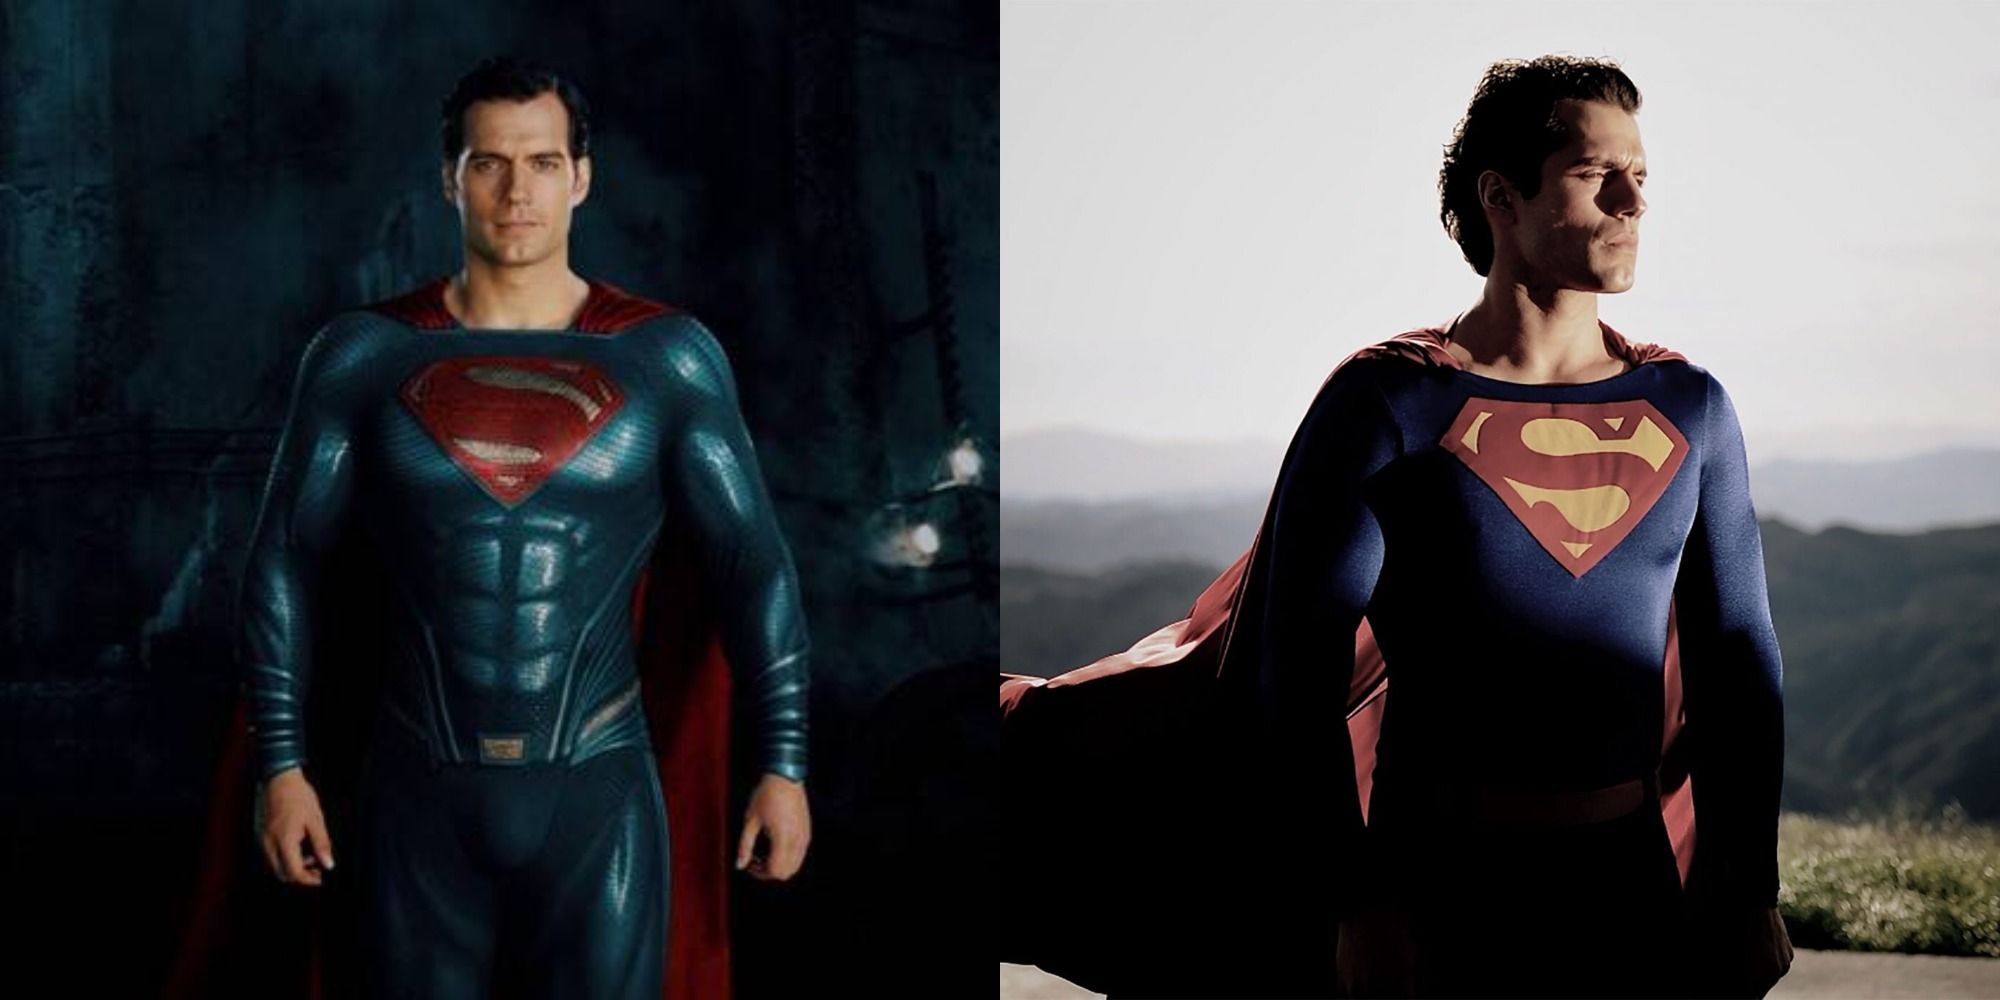 DCEU: 10 Details You Missed About Henry Cavill's Superman